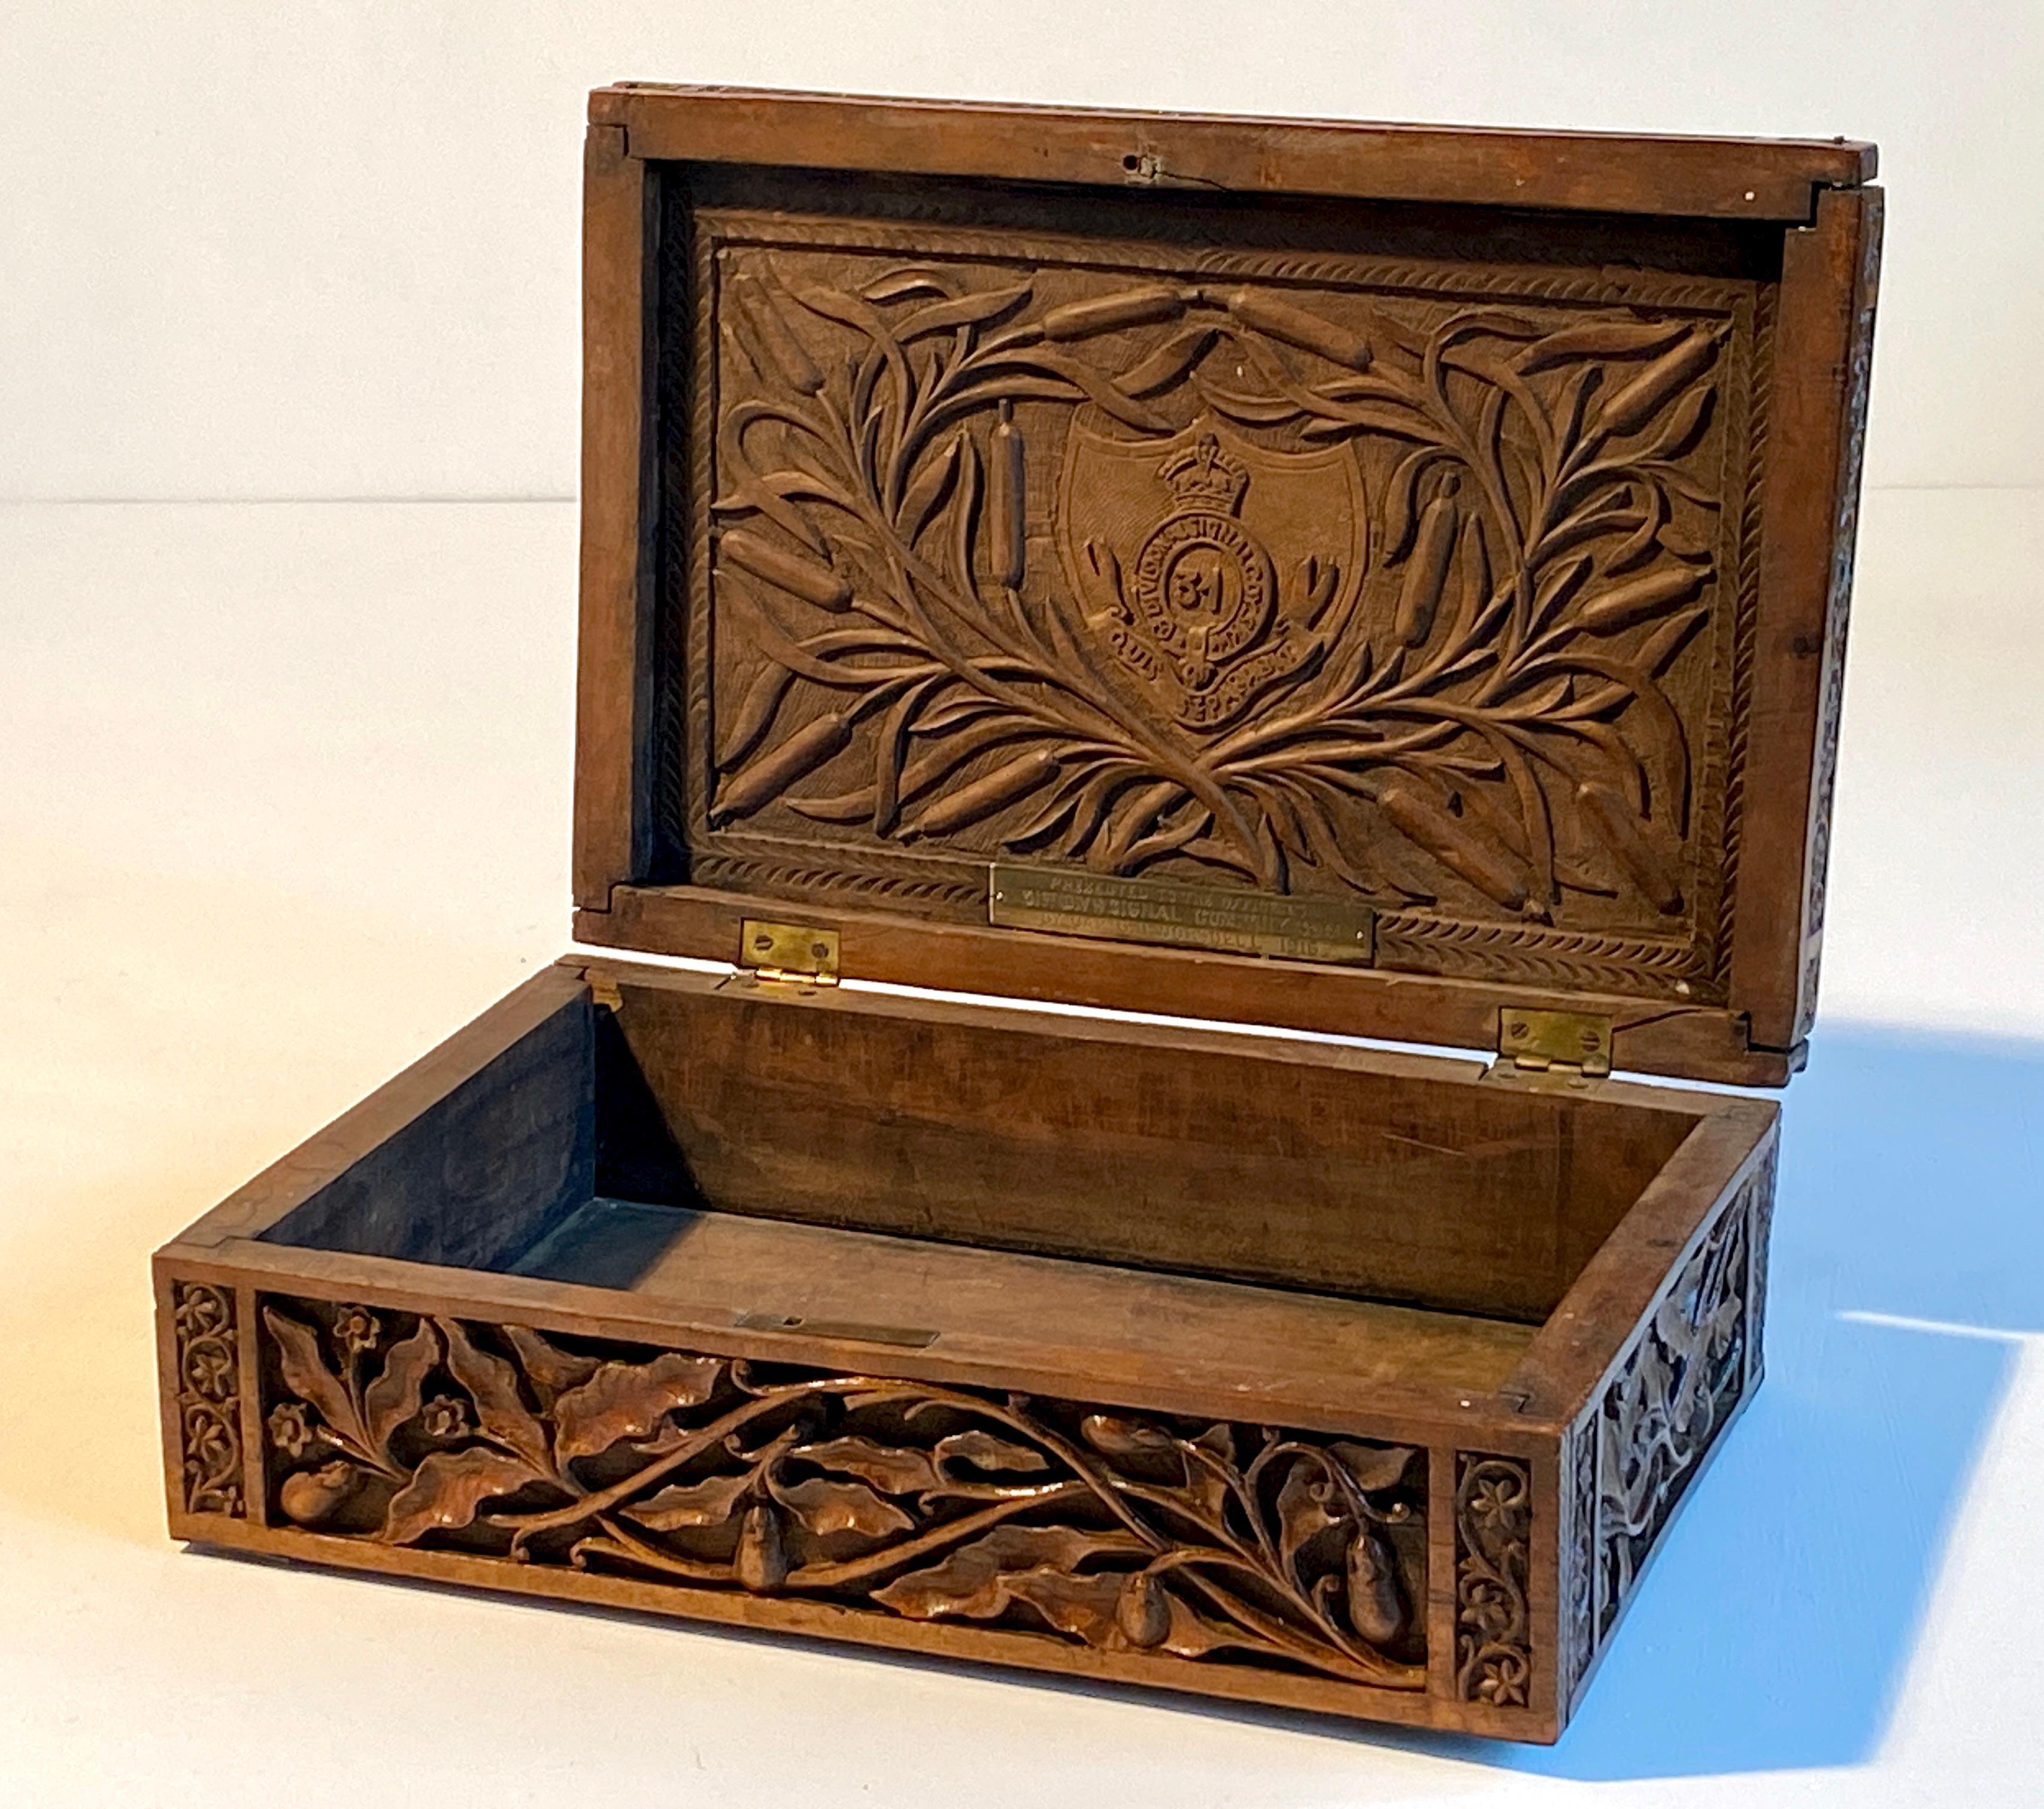 British Indian Ocean Territory Campaign Box Carved Gentleman's British Army WW2 Regimental Arms For Sale